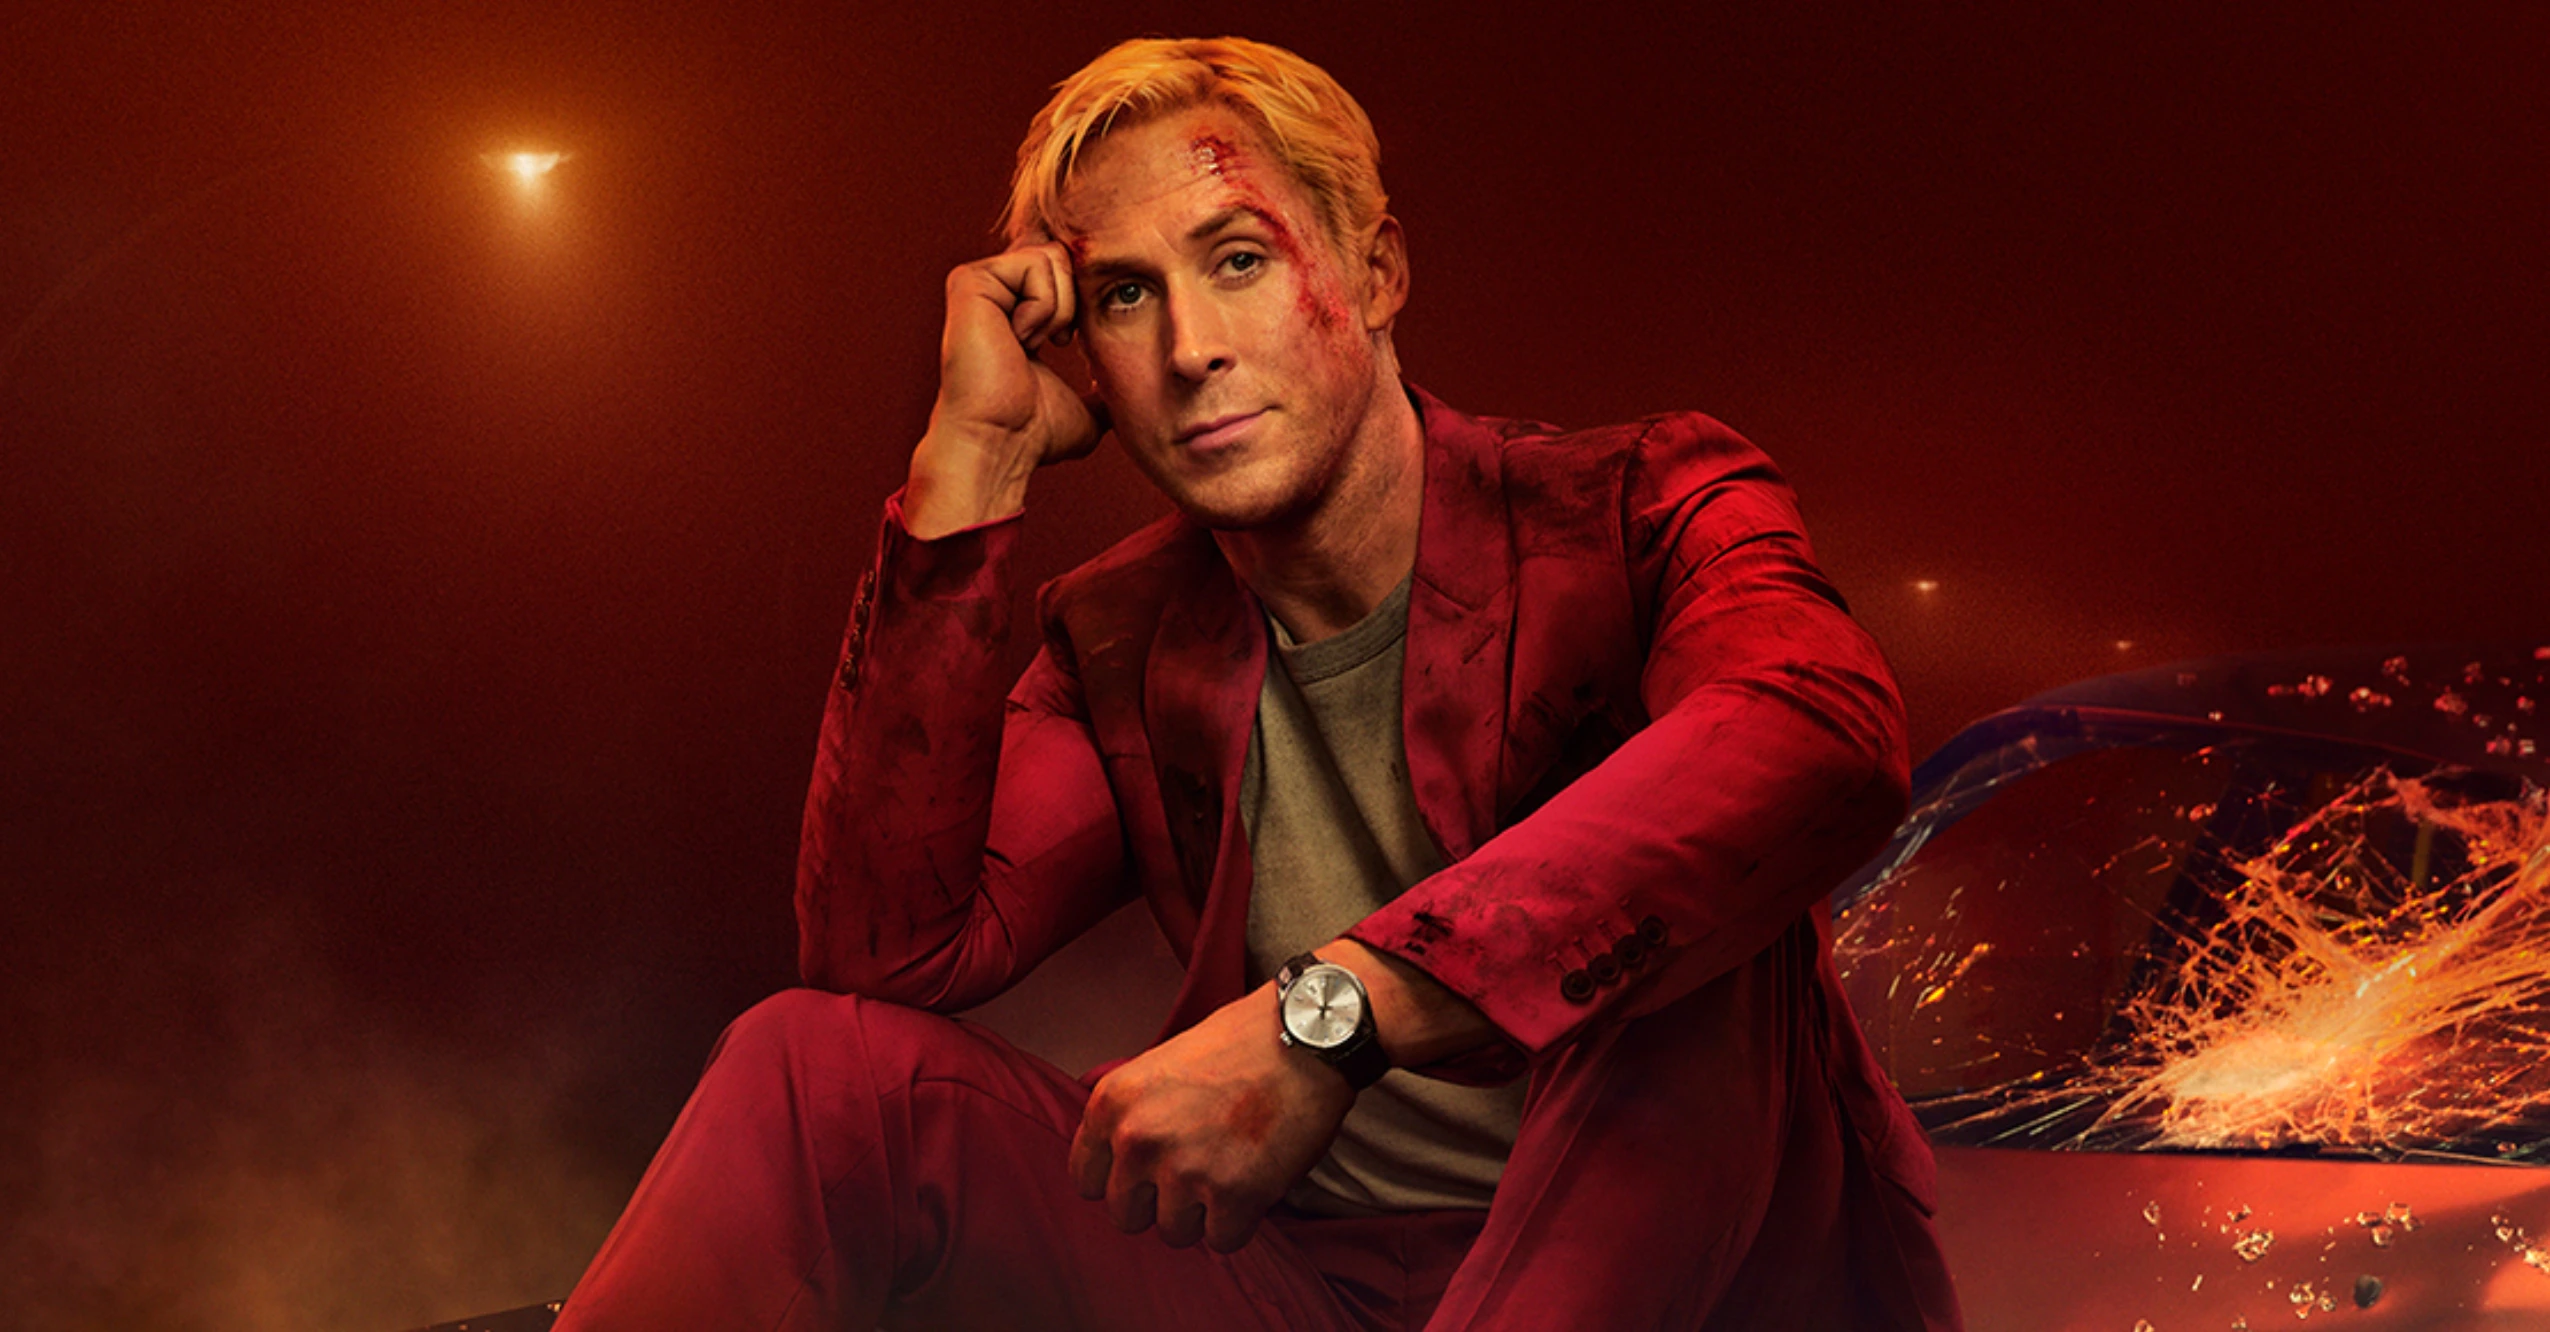 Ryan Gosling Stars In Explosive New Tag Heuer Campaign For Netflix’s ‘The Gray Man’